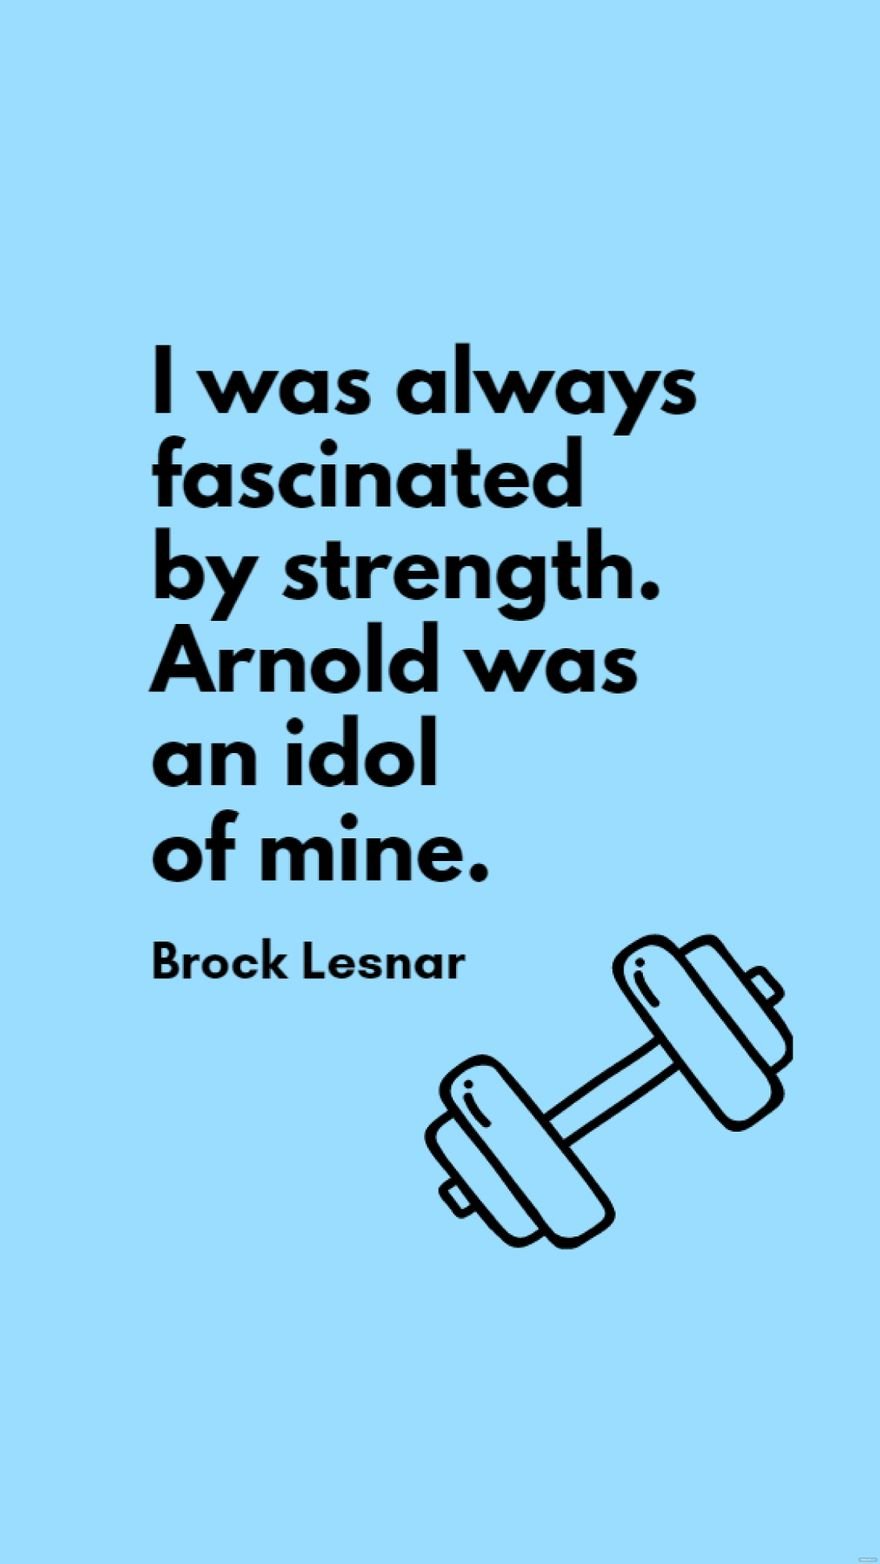 Free Brock Lesnar - I was always fascinated by strength. Arnold was an idol of mine. in JPG